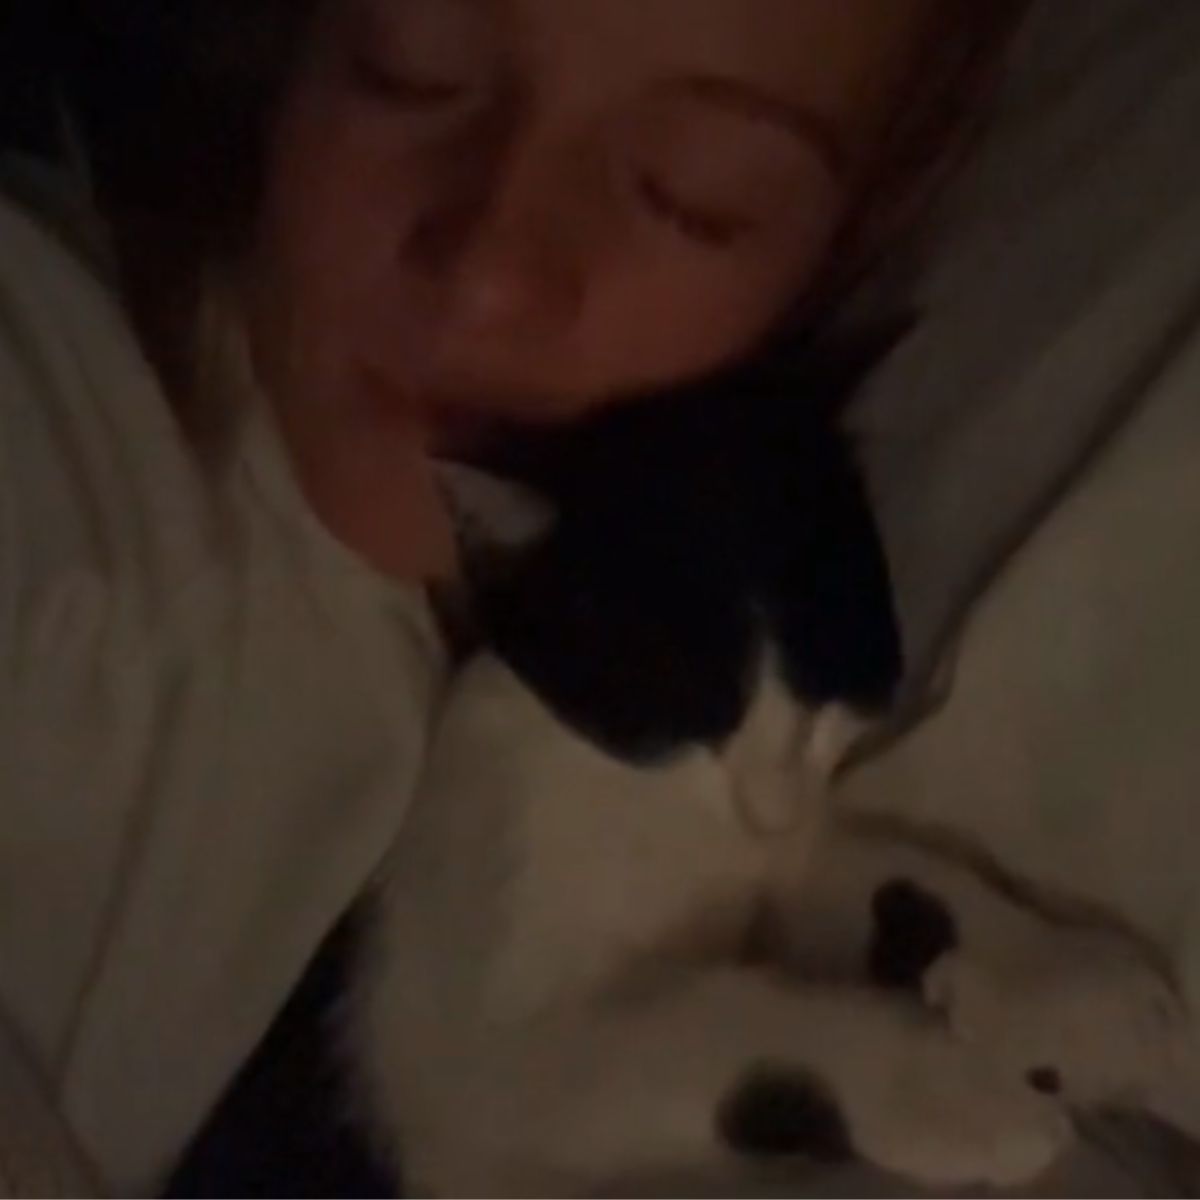 woman and cat snuggled up sleeping